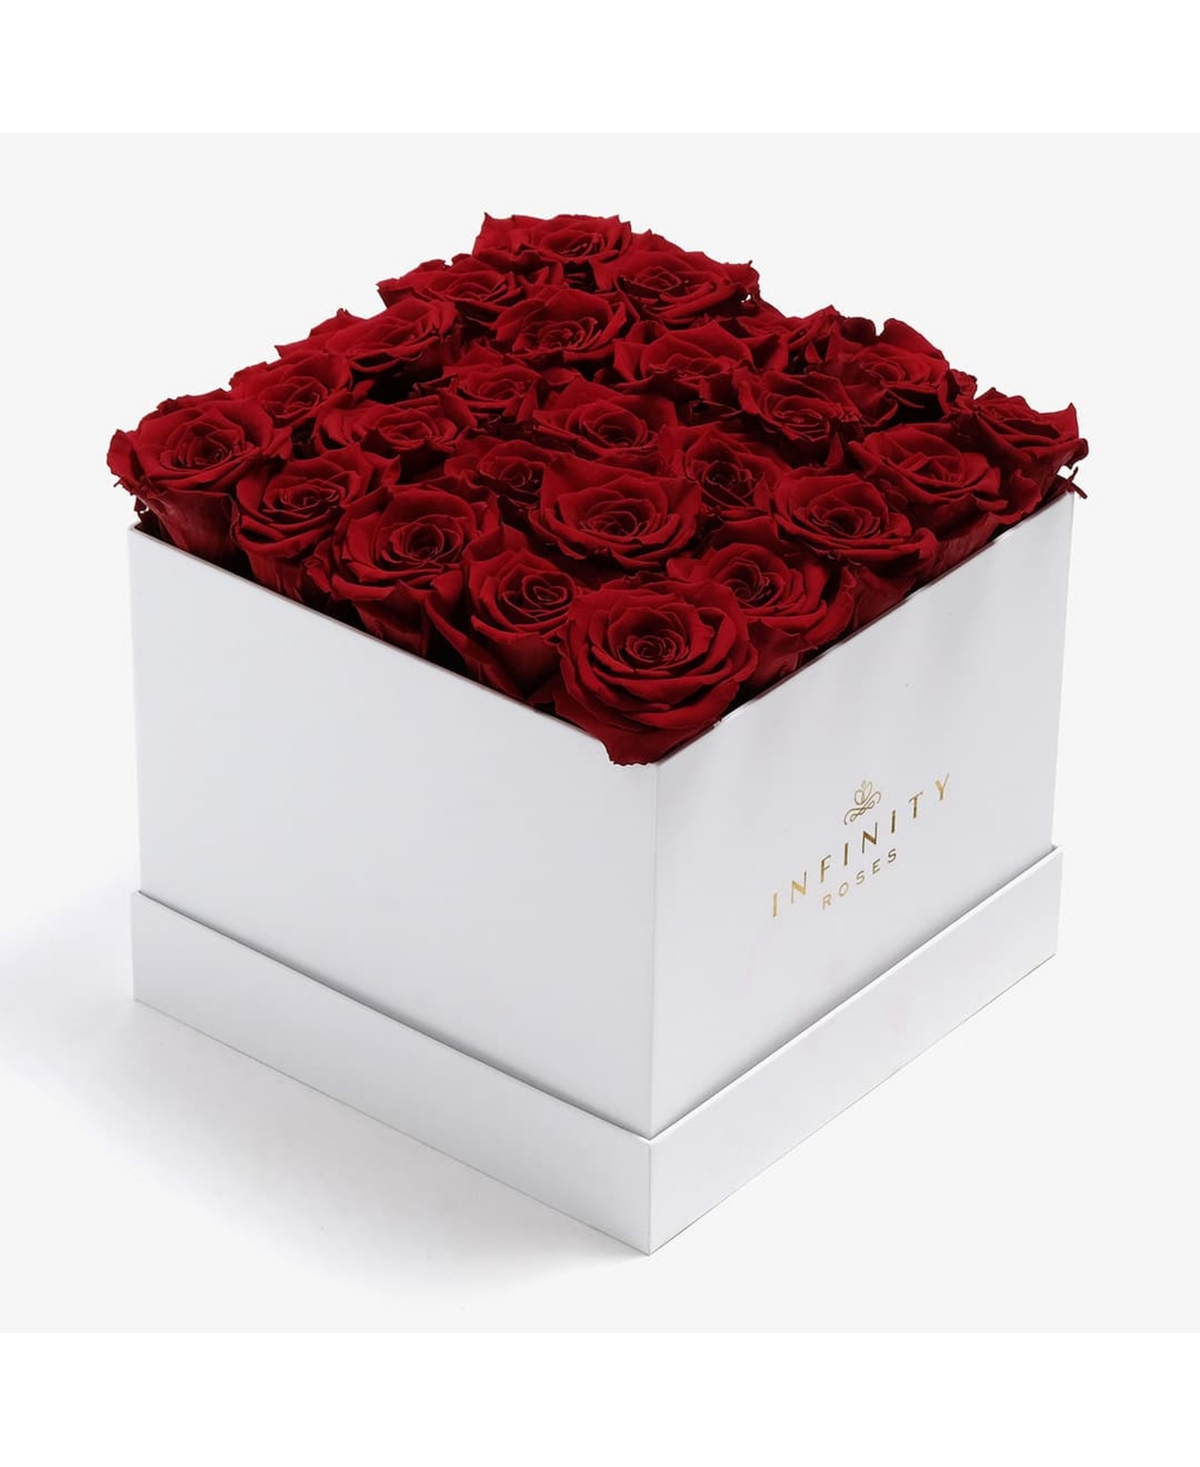 Square Box of 25 Red Real Roses Preserved to Last Over a Year - Red